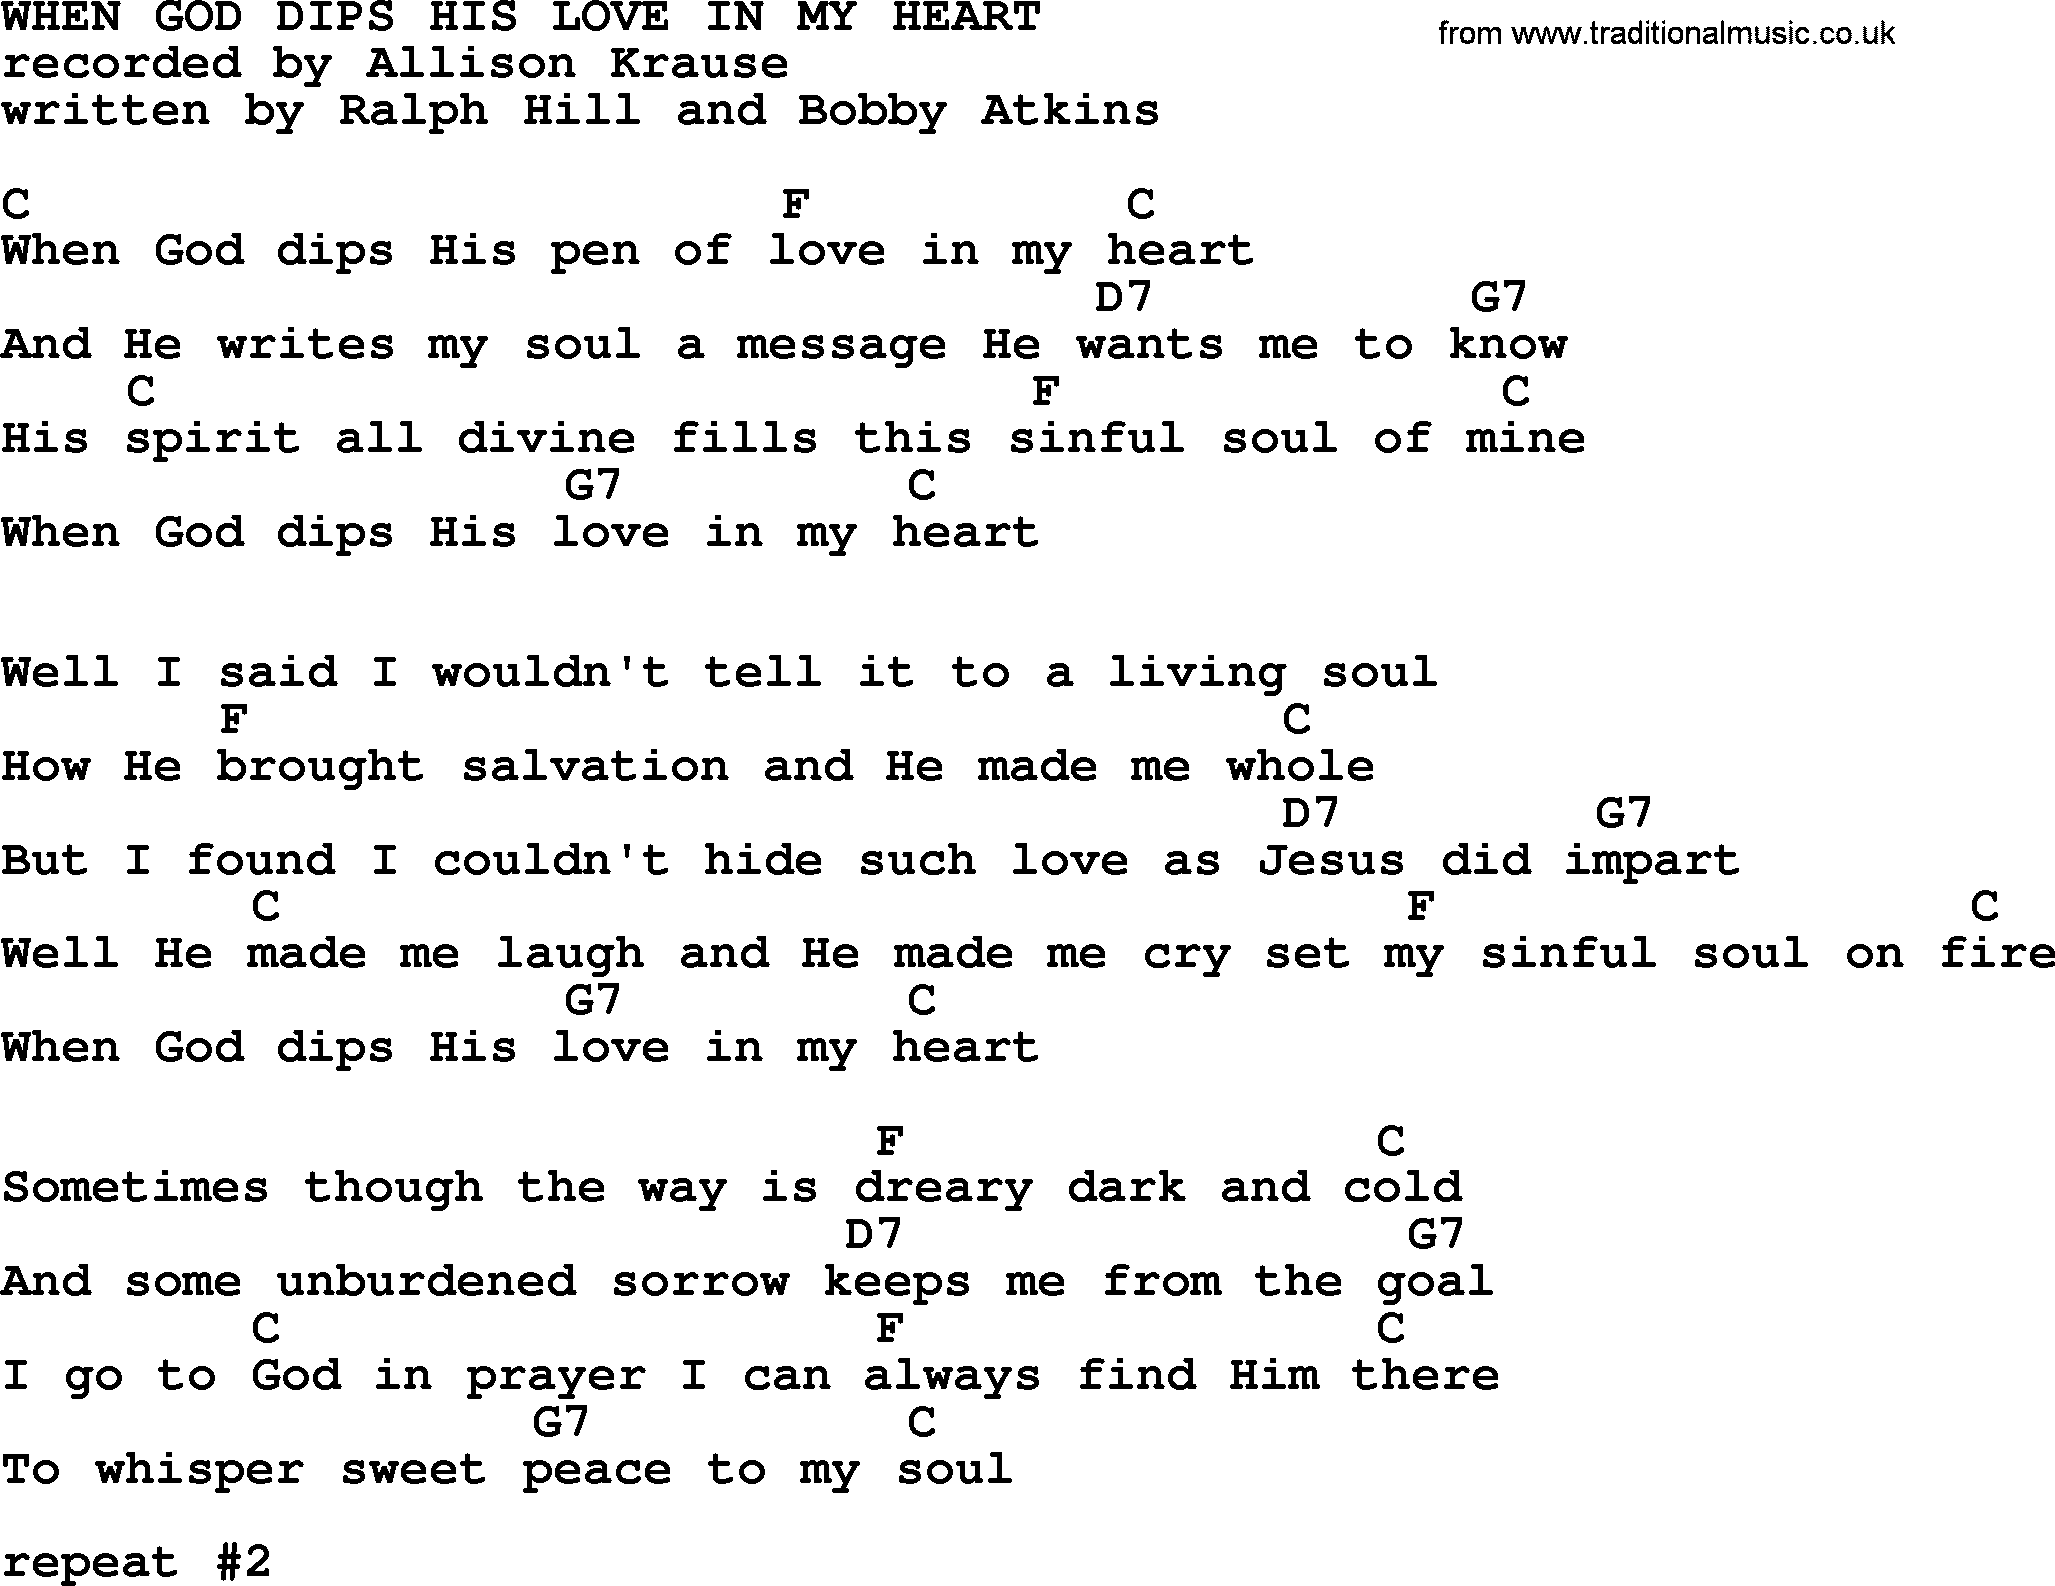 Hank Williams song When God Dips His Love In My Heart, lyrics and chords